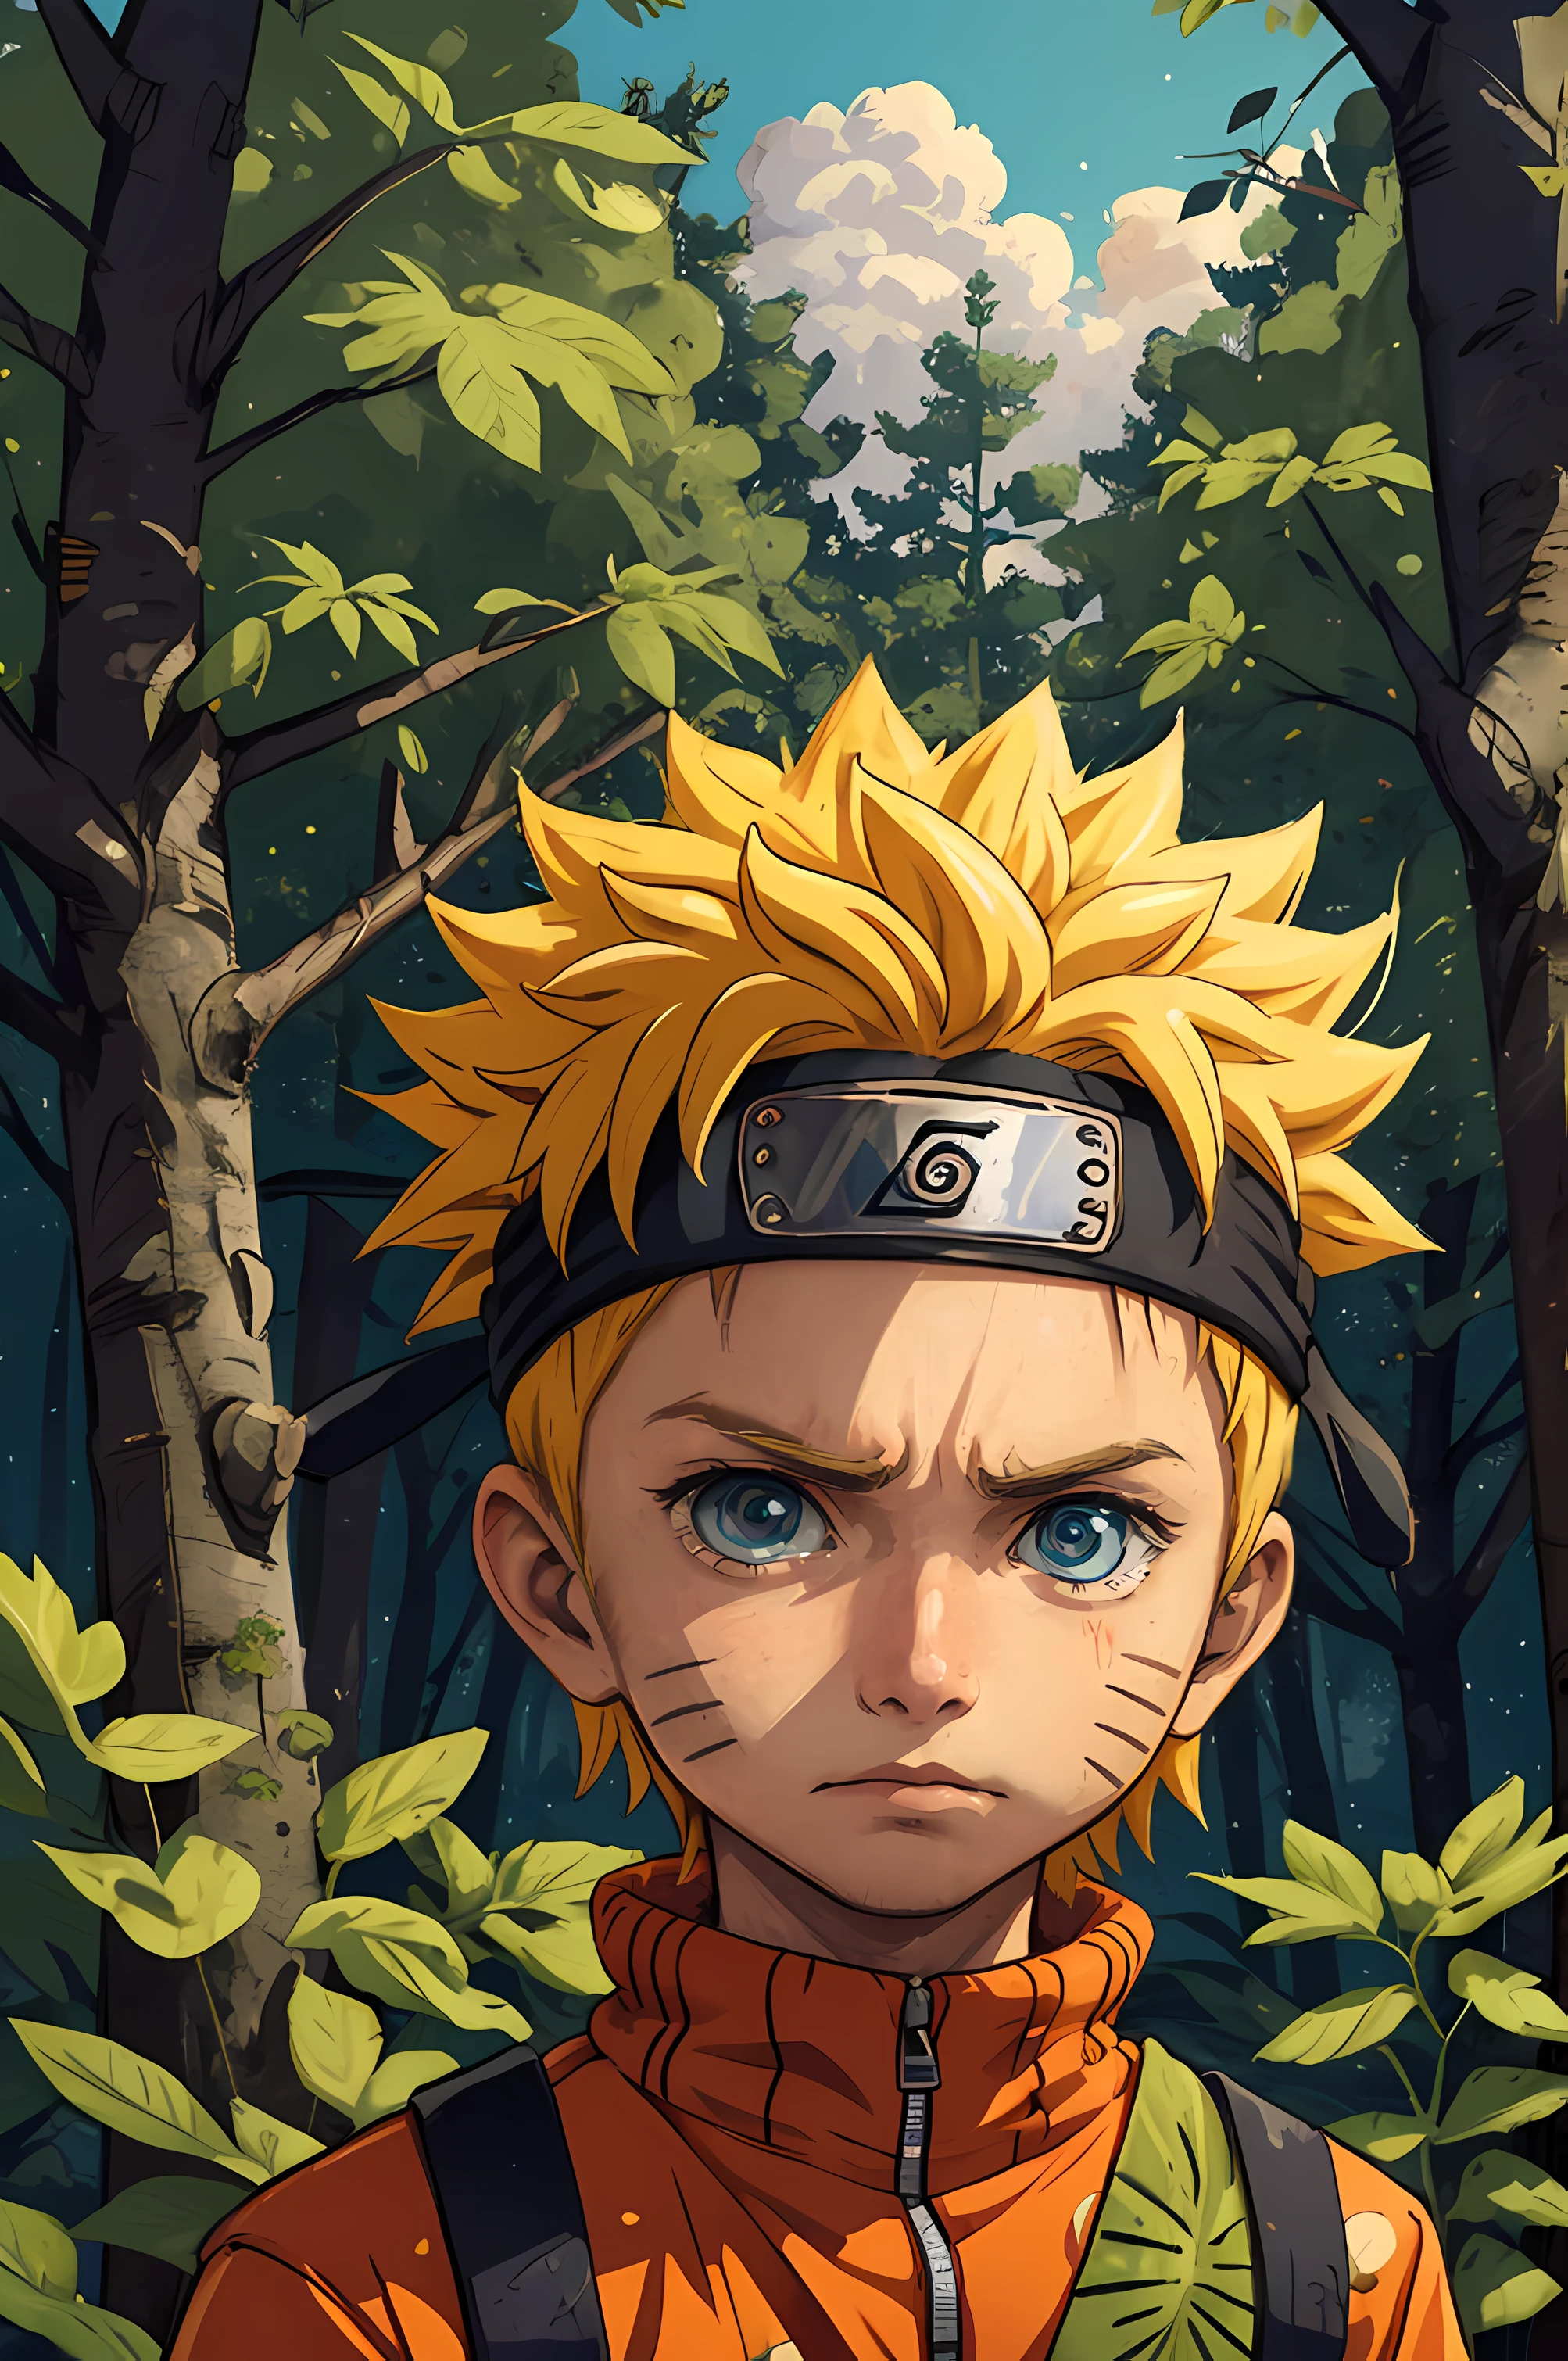 chibinaruto, 1boy, solo, male focus, blue eyes, facial mark, looking over the horizon, pajama, onesie pajama, portrait. Calm and peaceful chibinaruto character wearing a naruto-themed onesie pajama. The character is depicted in a lush forest background, surrounded by vibrant greenery and tall trees. The overall color scheme of the artwork is earthy and natural, with warm tones and soft lighting. The chibinaruto character has a frowning expression on his face, adding a touch of seriousness to the otherwise peaceful scene. His blue eyes stand out against his fair skin, and a distinct facial mark adorns his cheek. He is looking over the horizon, gazing into the distance with a sense of contemplation. The portrait captures the essence of chibinaruto's calm and introspective nature, inviting viewers to join him in his tranquil world.